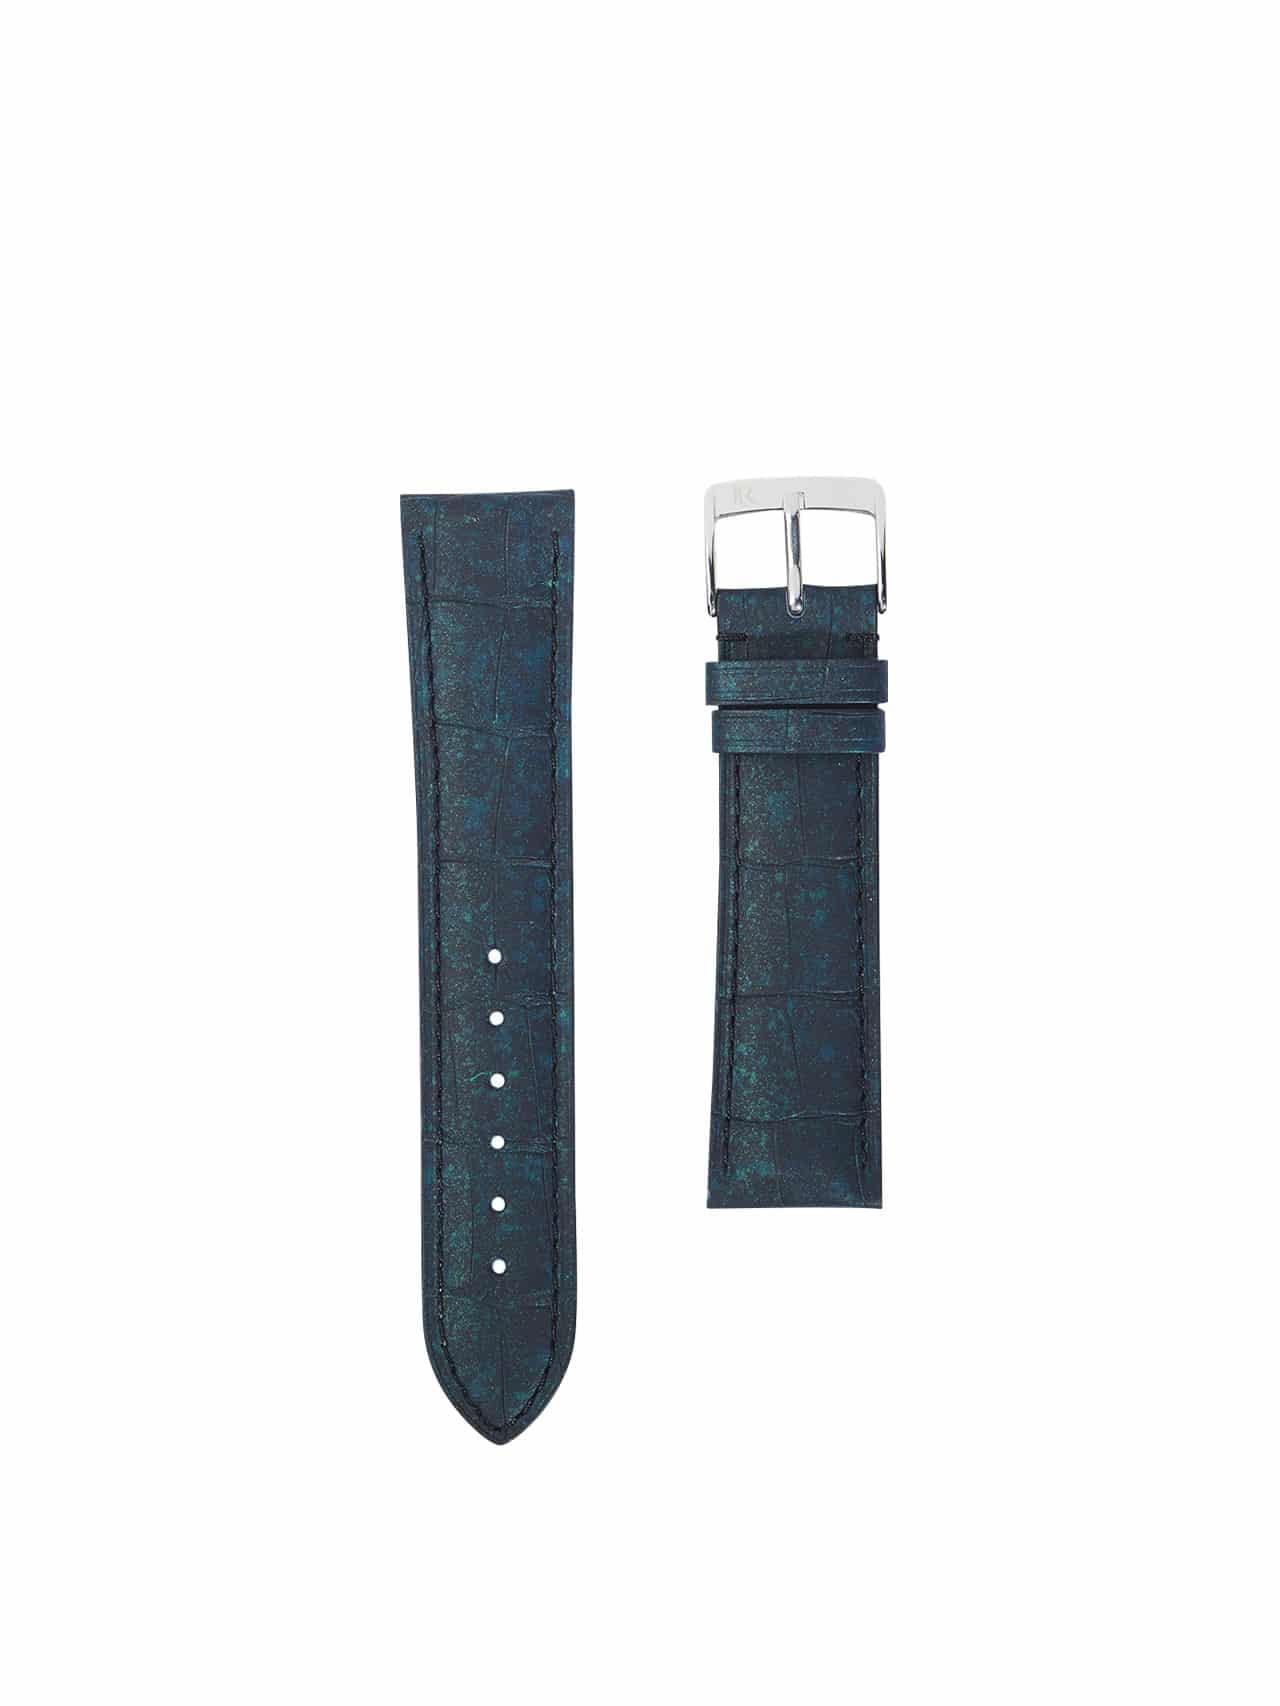 Watch strap 3.5 Asteria rubber touch crocodile  front